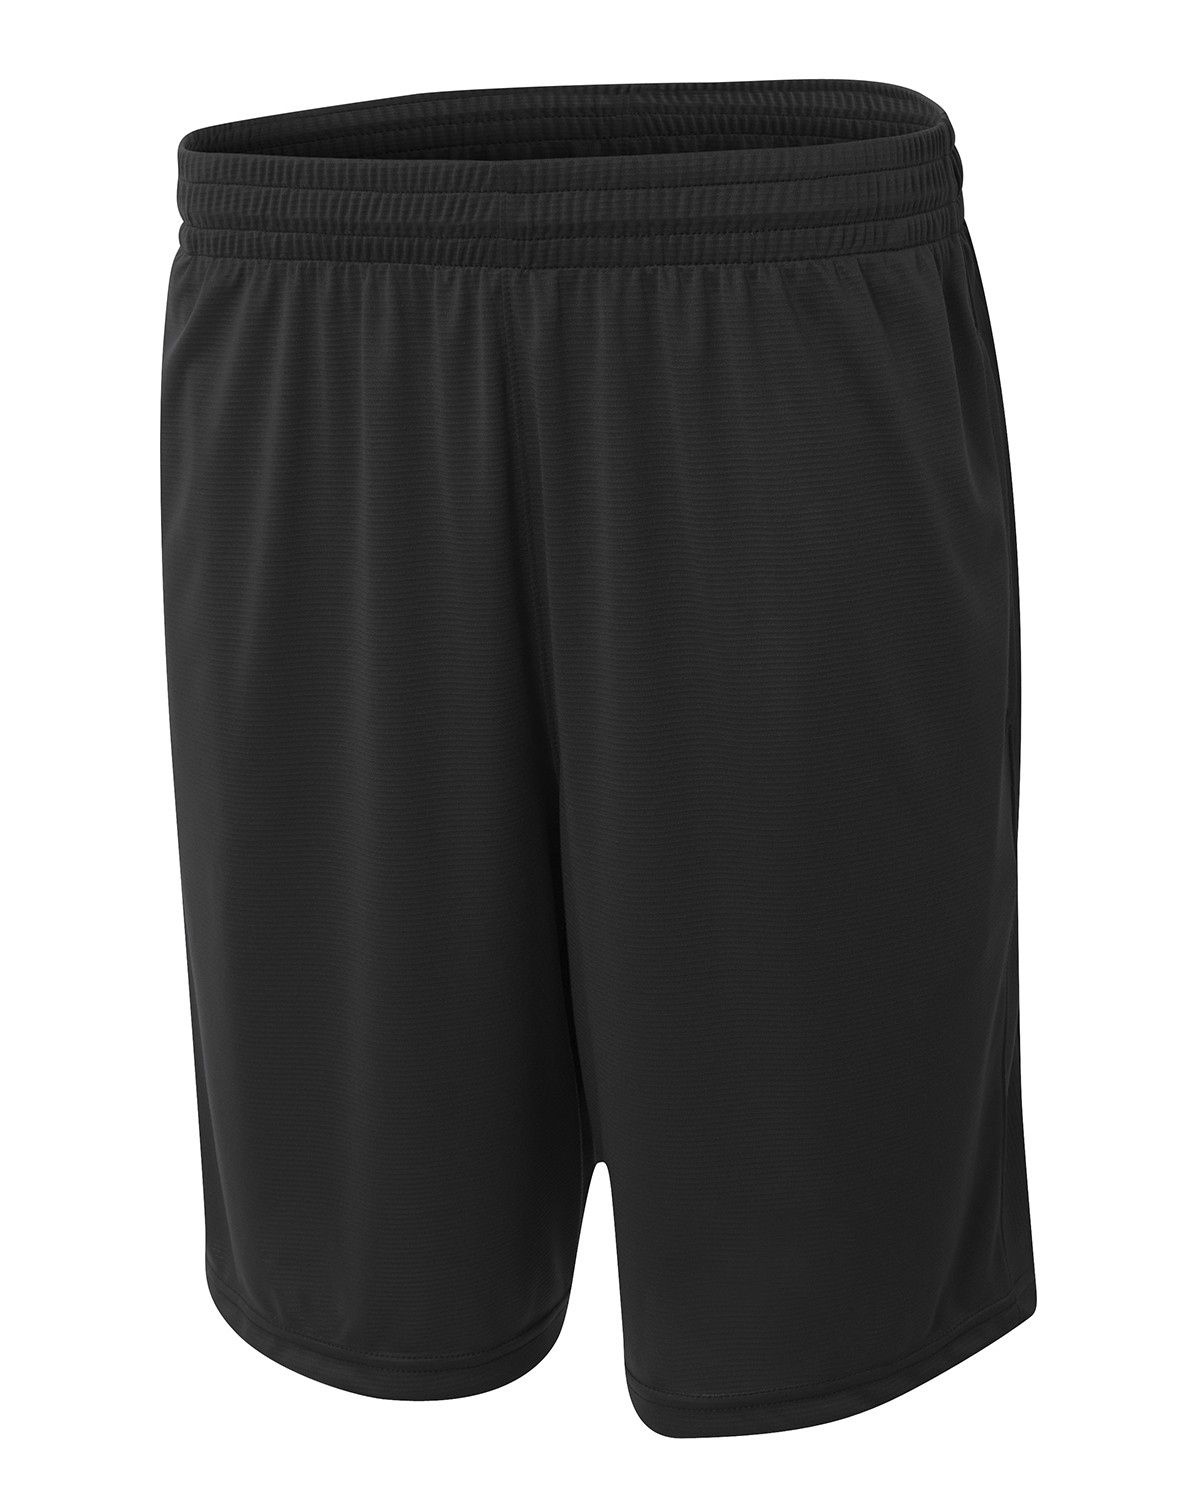 A4 NB5370 Youth Player 8 inch Pocketed Polyester Short